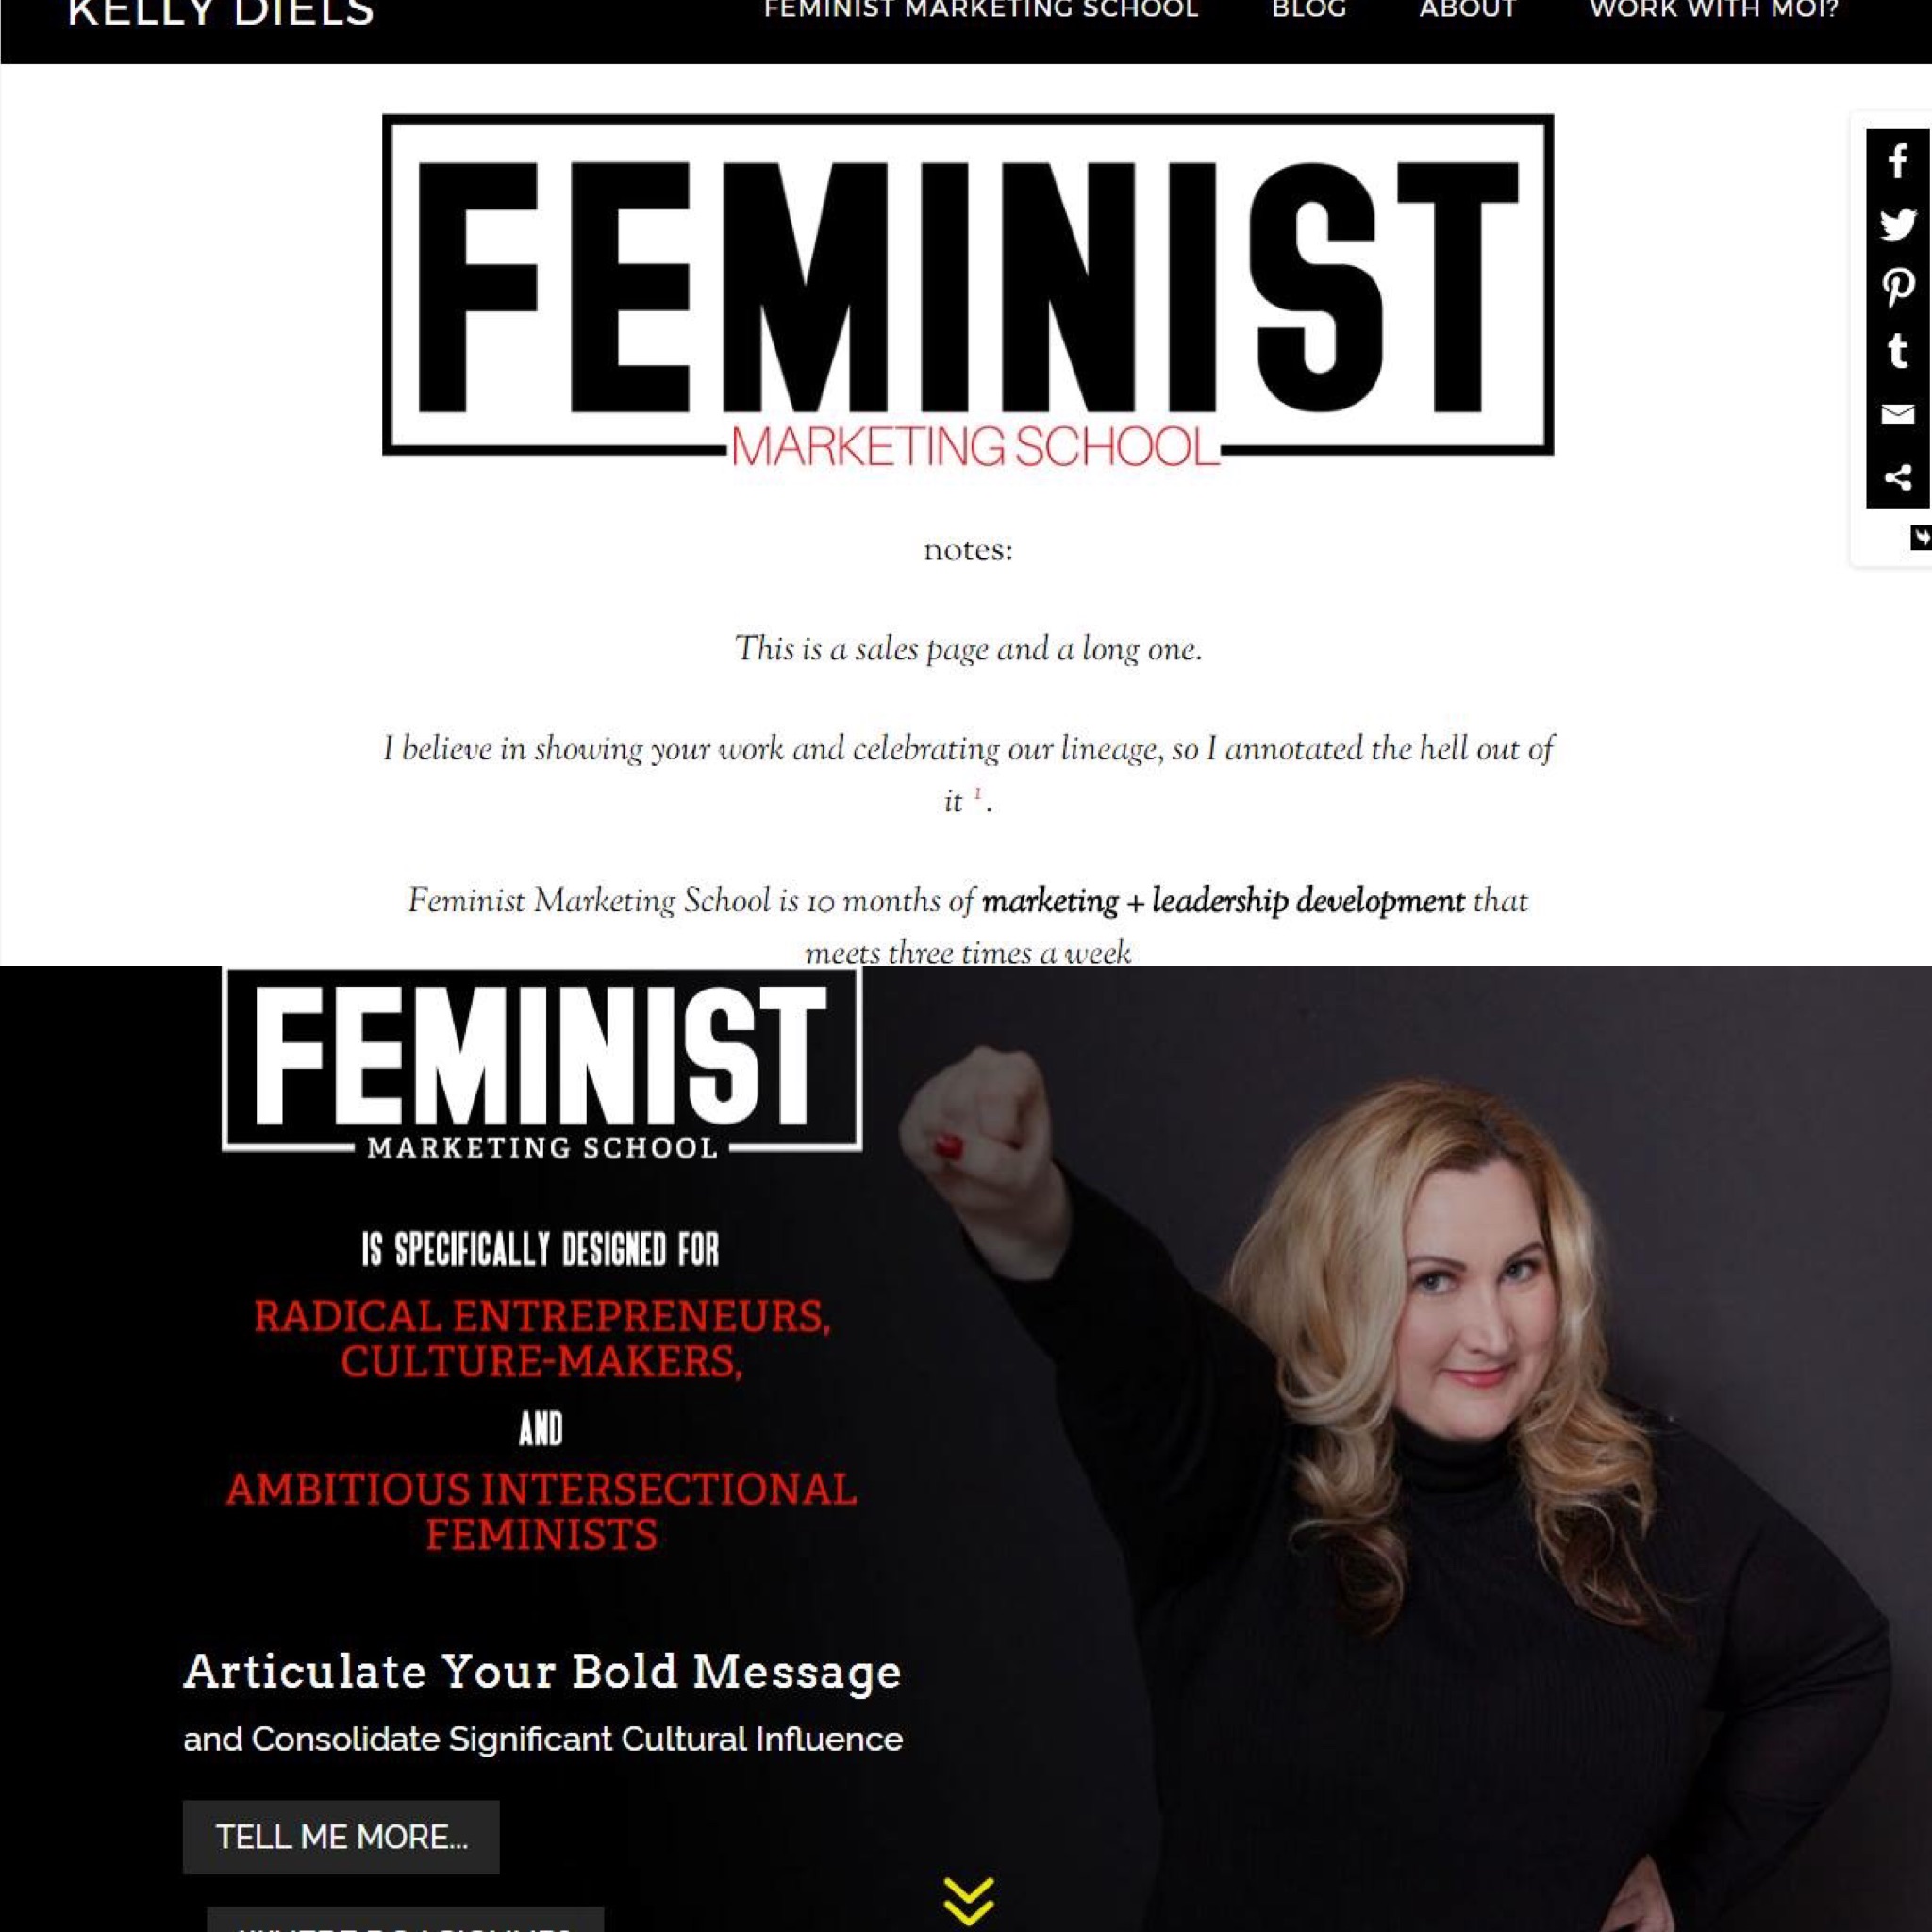 feminist marketing school before and after I published then polished